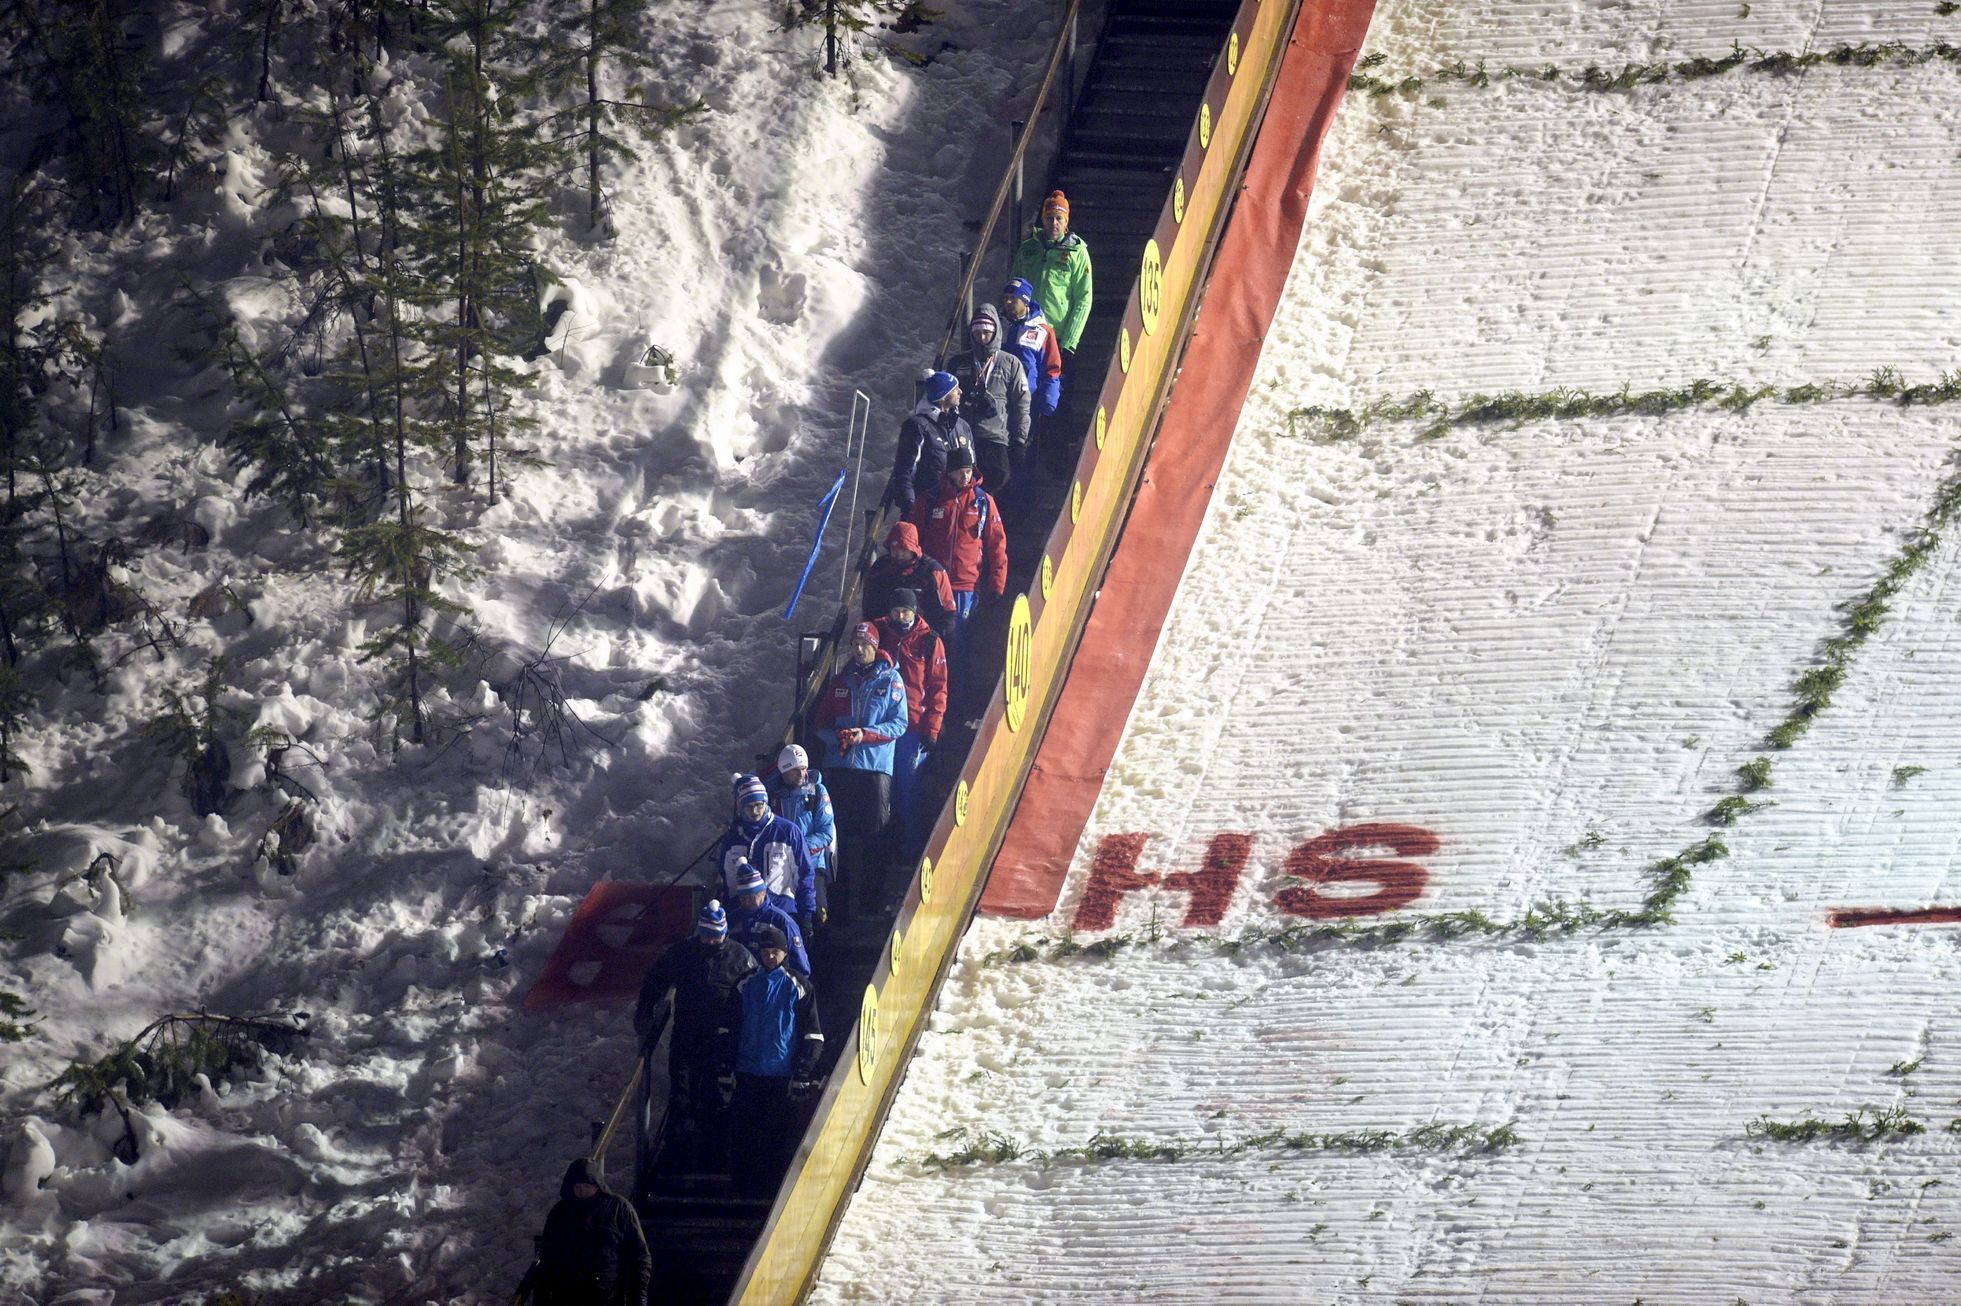 Coaches leave the ski jumping hill after the ski jumping competition in Ruka was canceled due to bad weather, at the FIS World Cup Ruka Nordic 2015 event